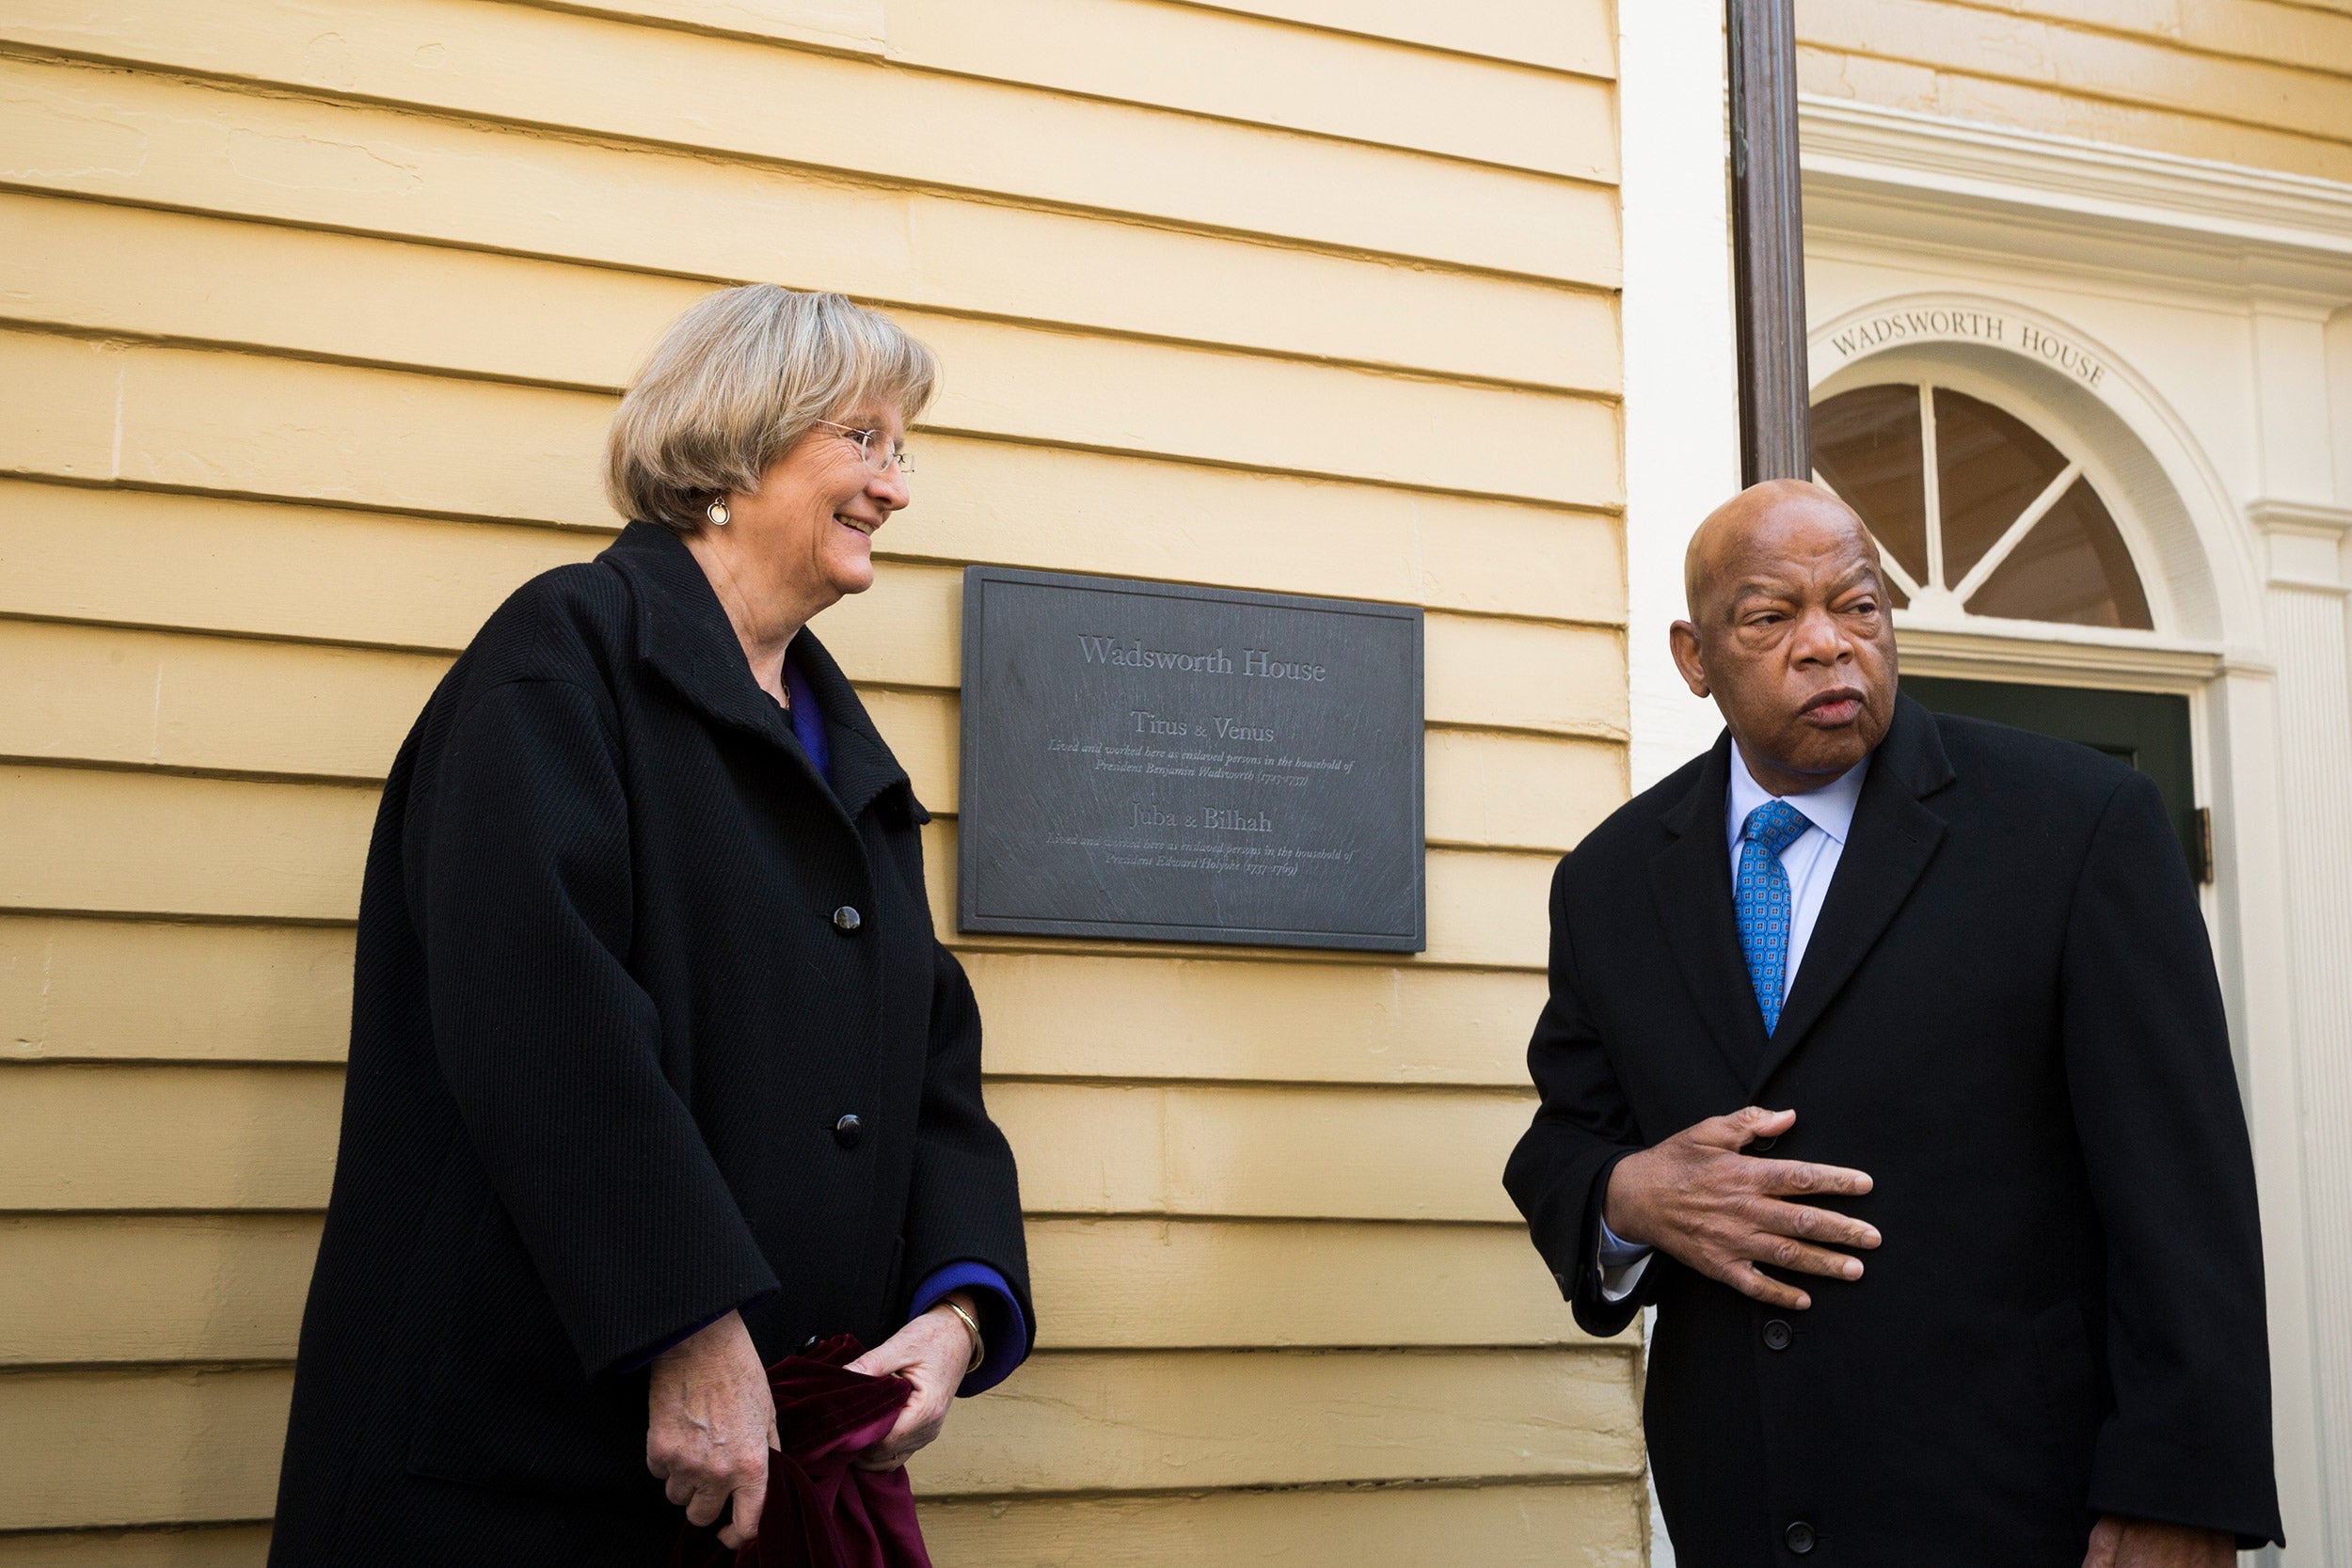 Harvard President Drew Faust and Congressman John Lewis unveil a plaque that recognizes four slaves who worked at Wadsworth House.